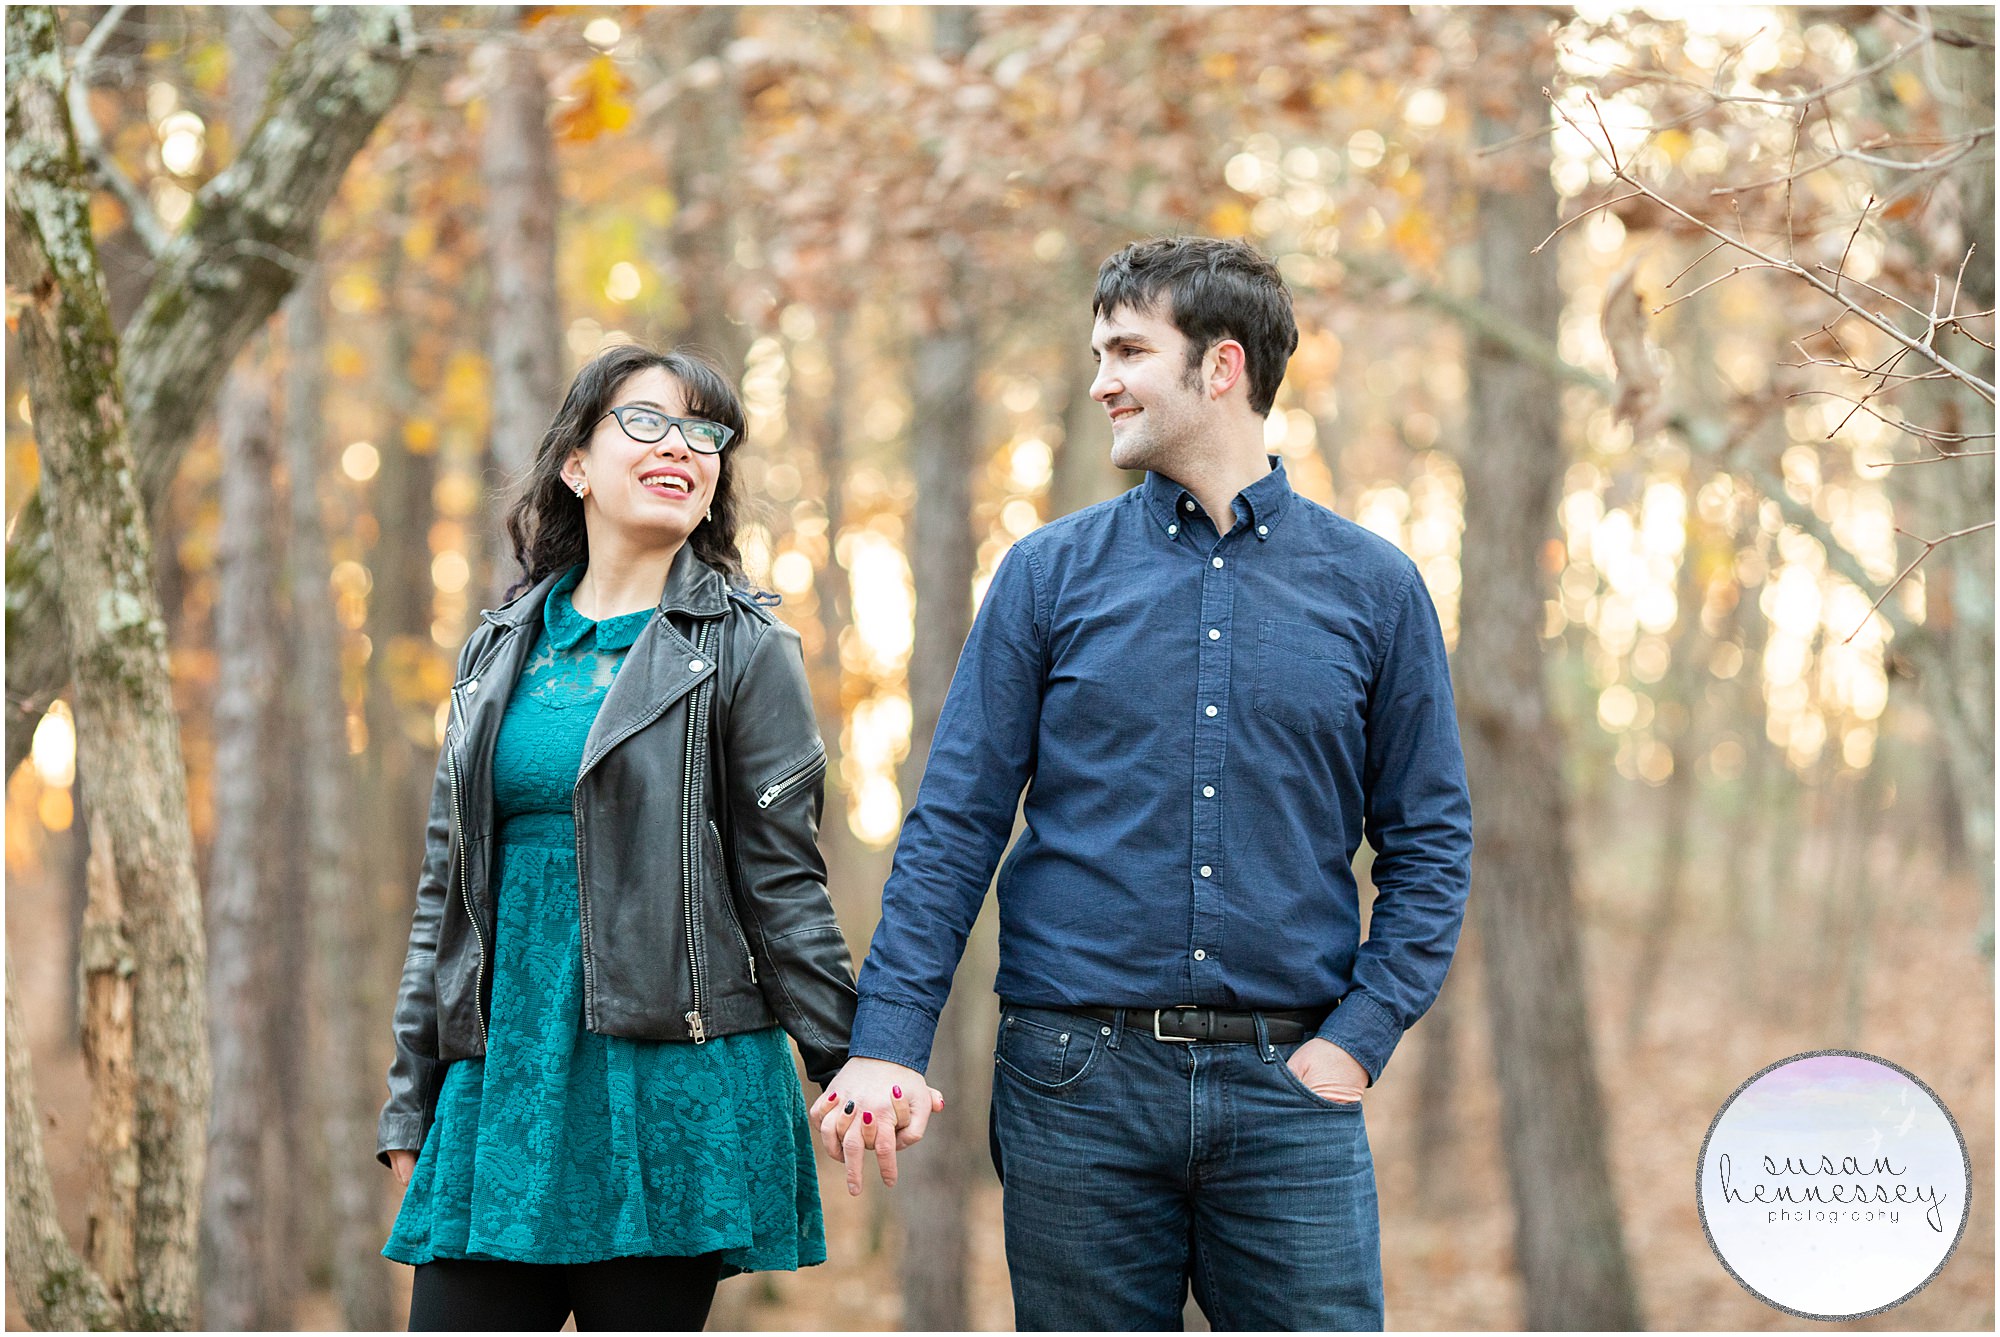 Fall engagement session at Blueberry Hill in Gibbsboro, NJ